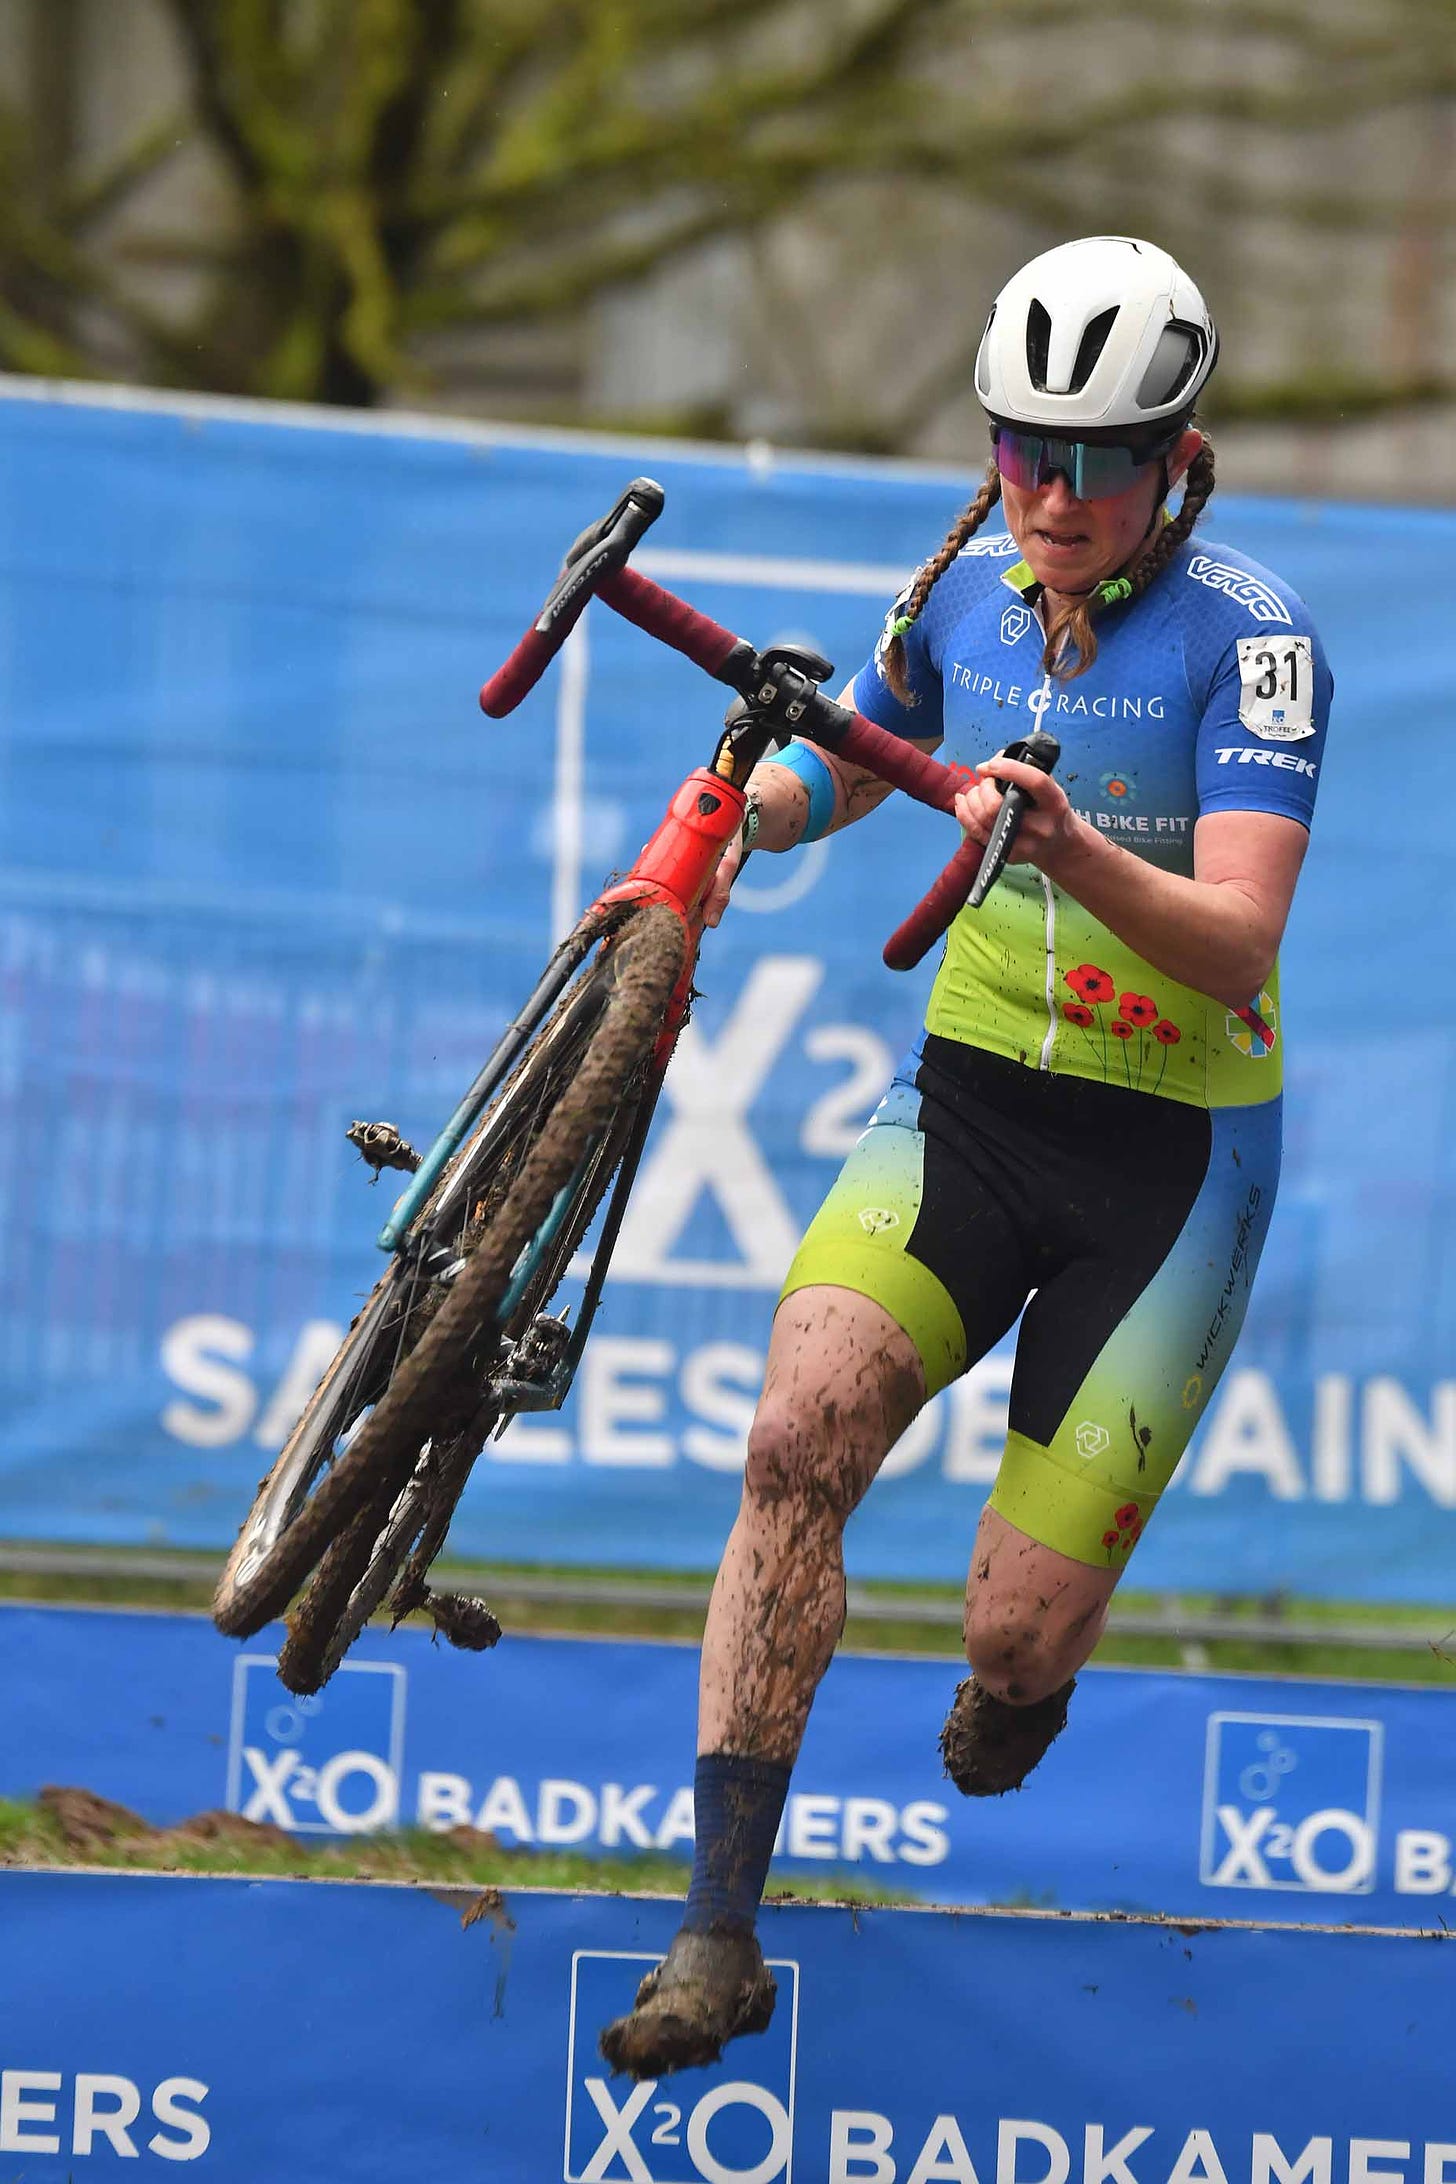 A female cyclist lifts her red bike while leaping over a barrier on a muddy cyclocross course.